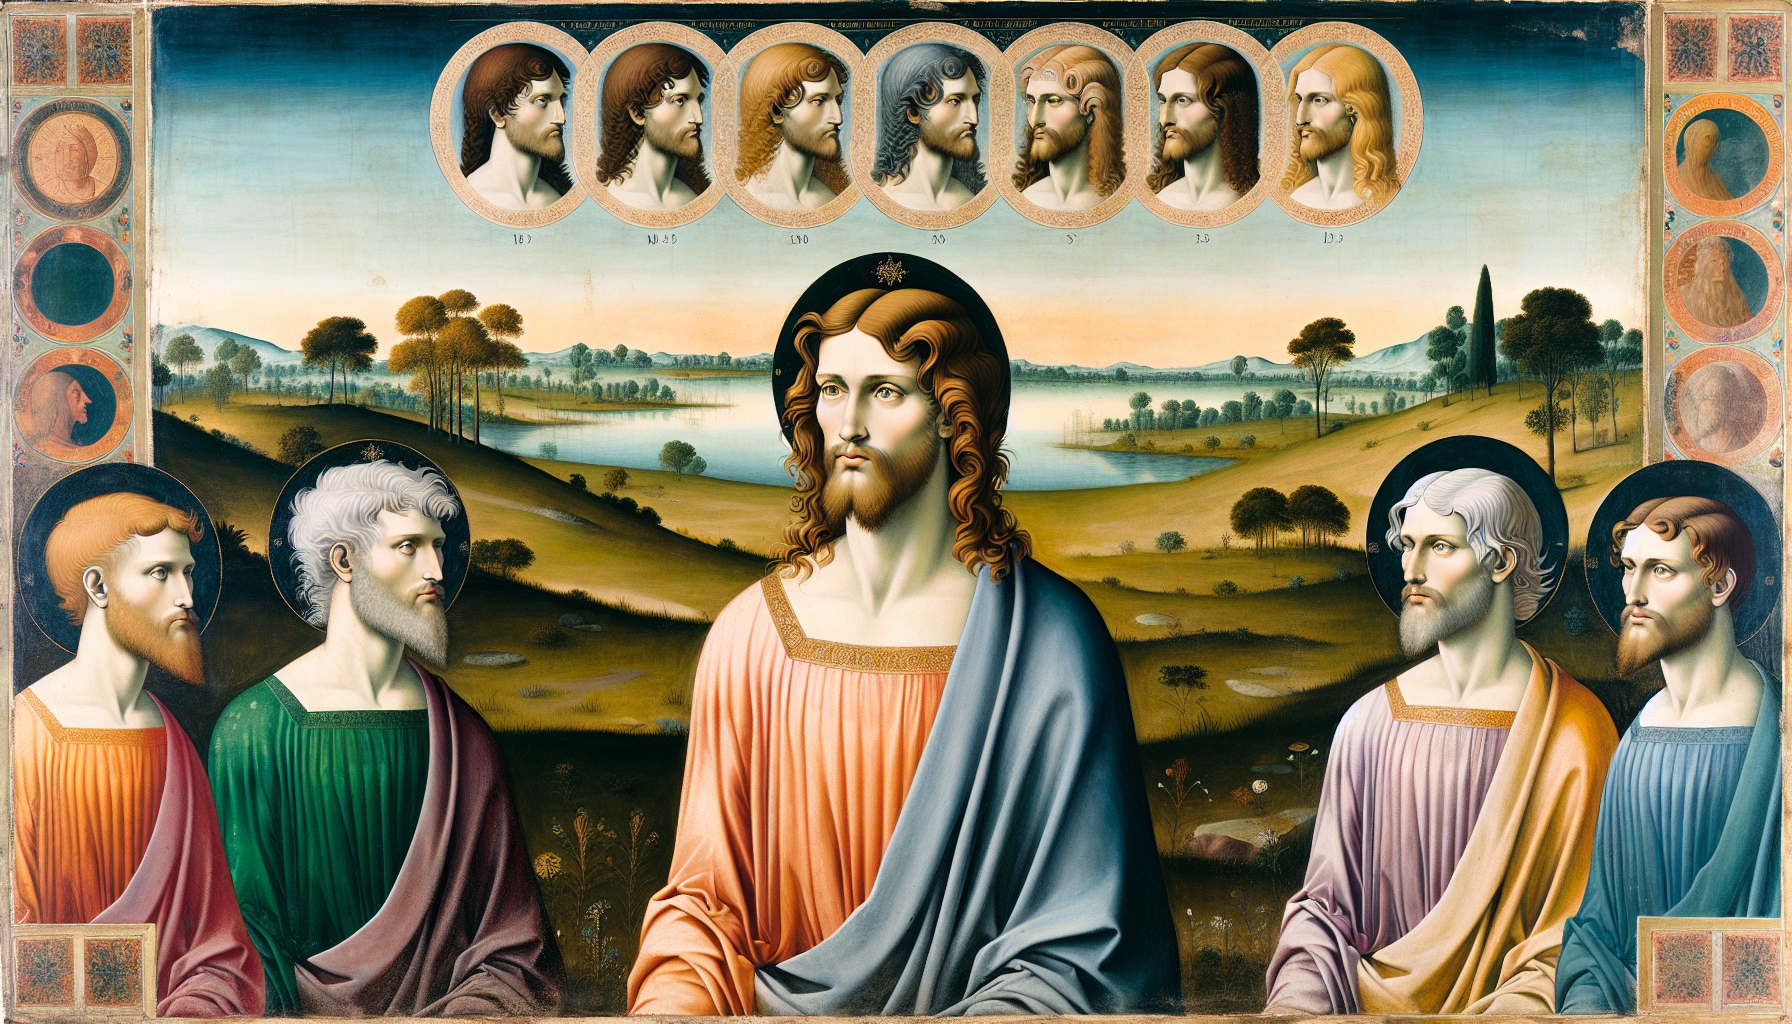 Create a detailed Renaissance-style painting depicting Jesus Christ with different historical hairstyles, including long hair, short hair, and medium-length hair. The background should feature a seren